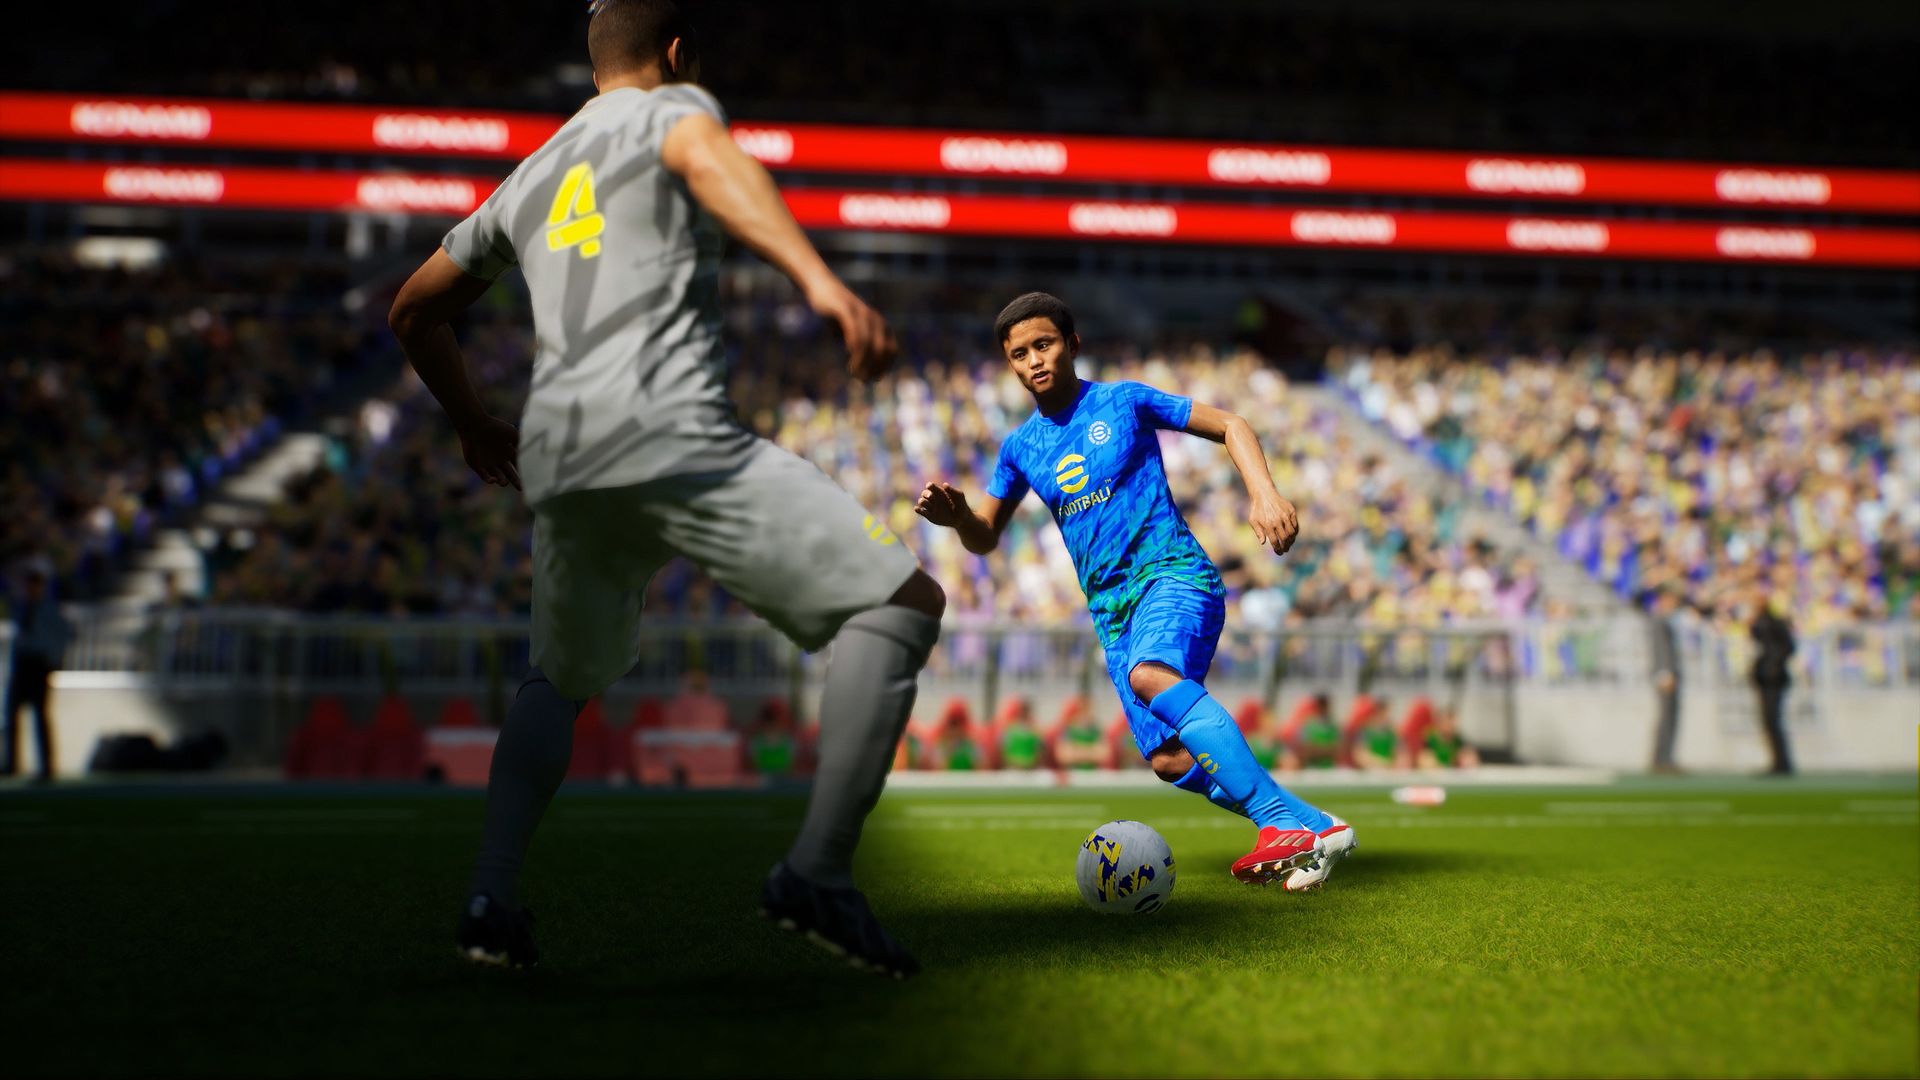 Screenshot of a soccer player trying to score a goal